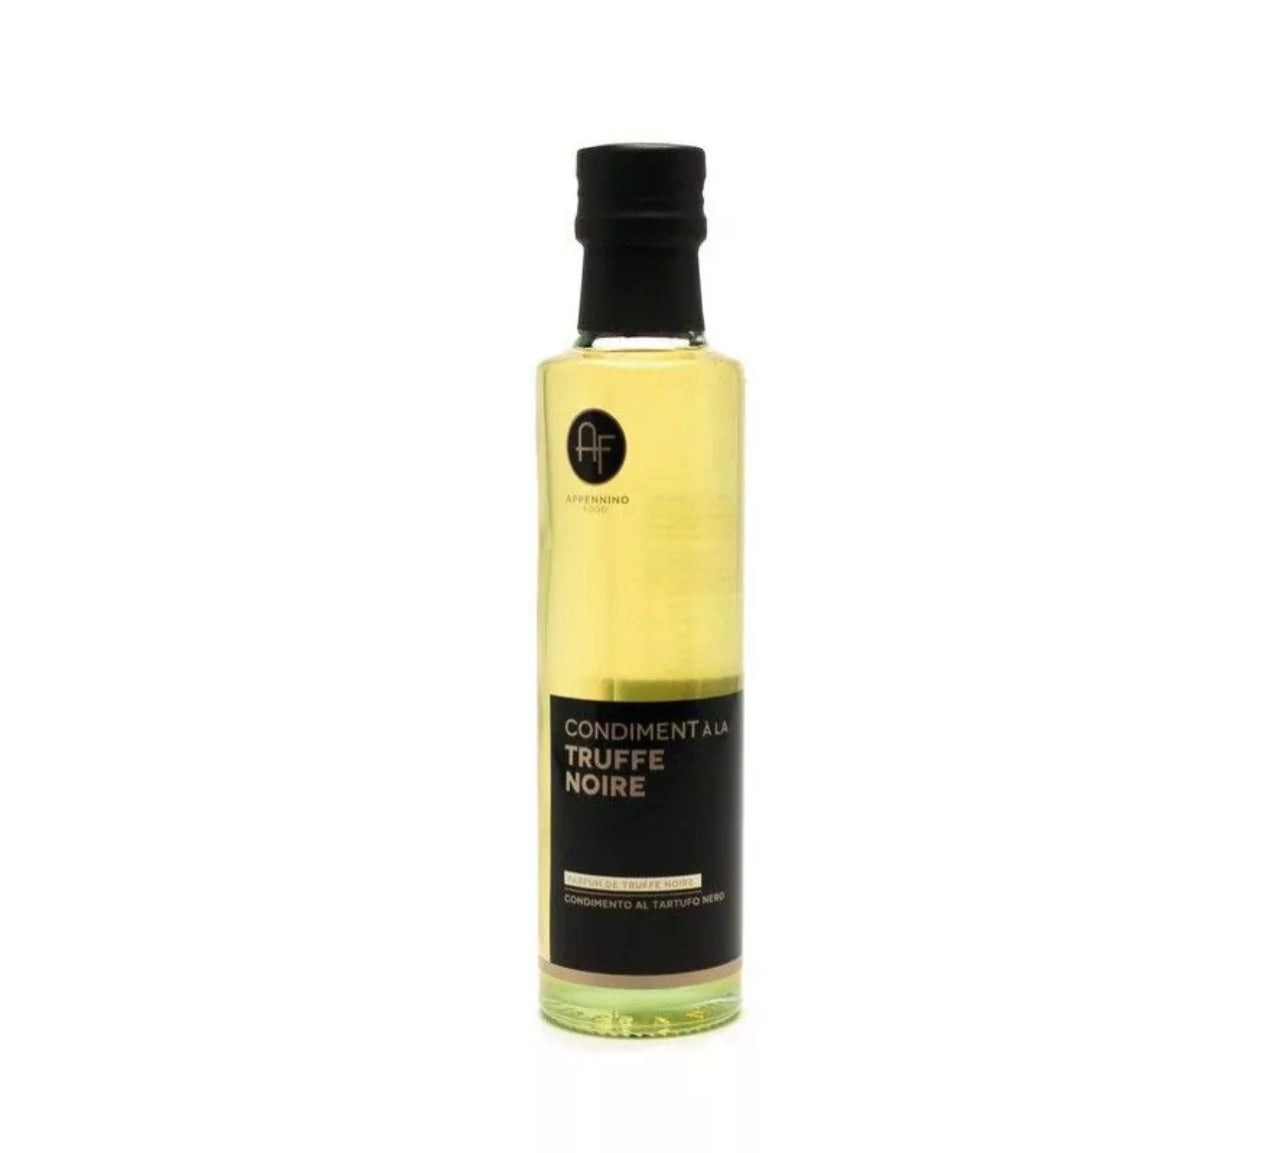 Olive oil flavored with black truffle - 25cl